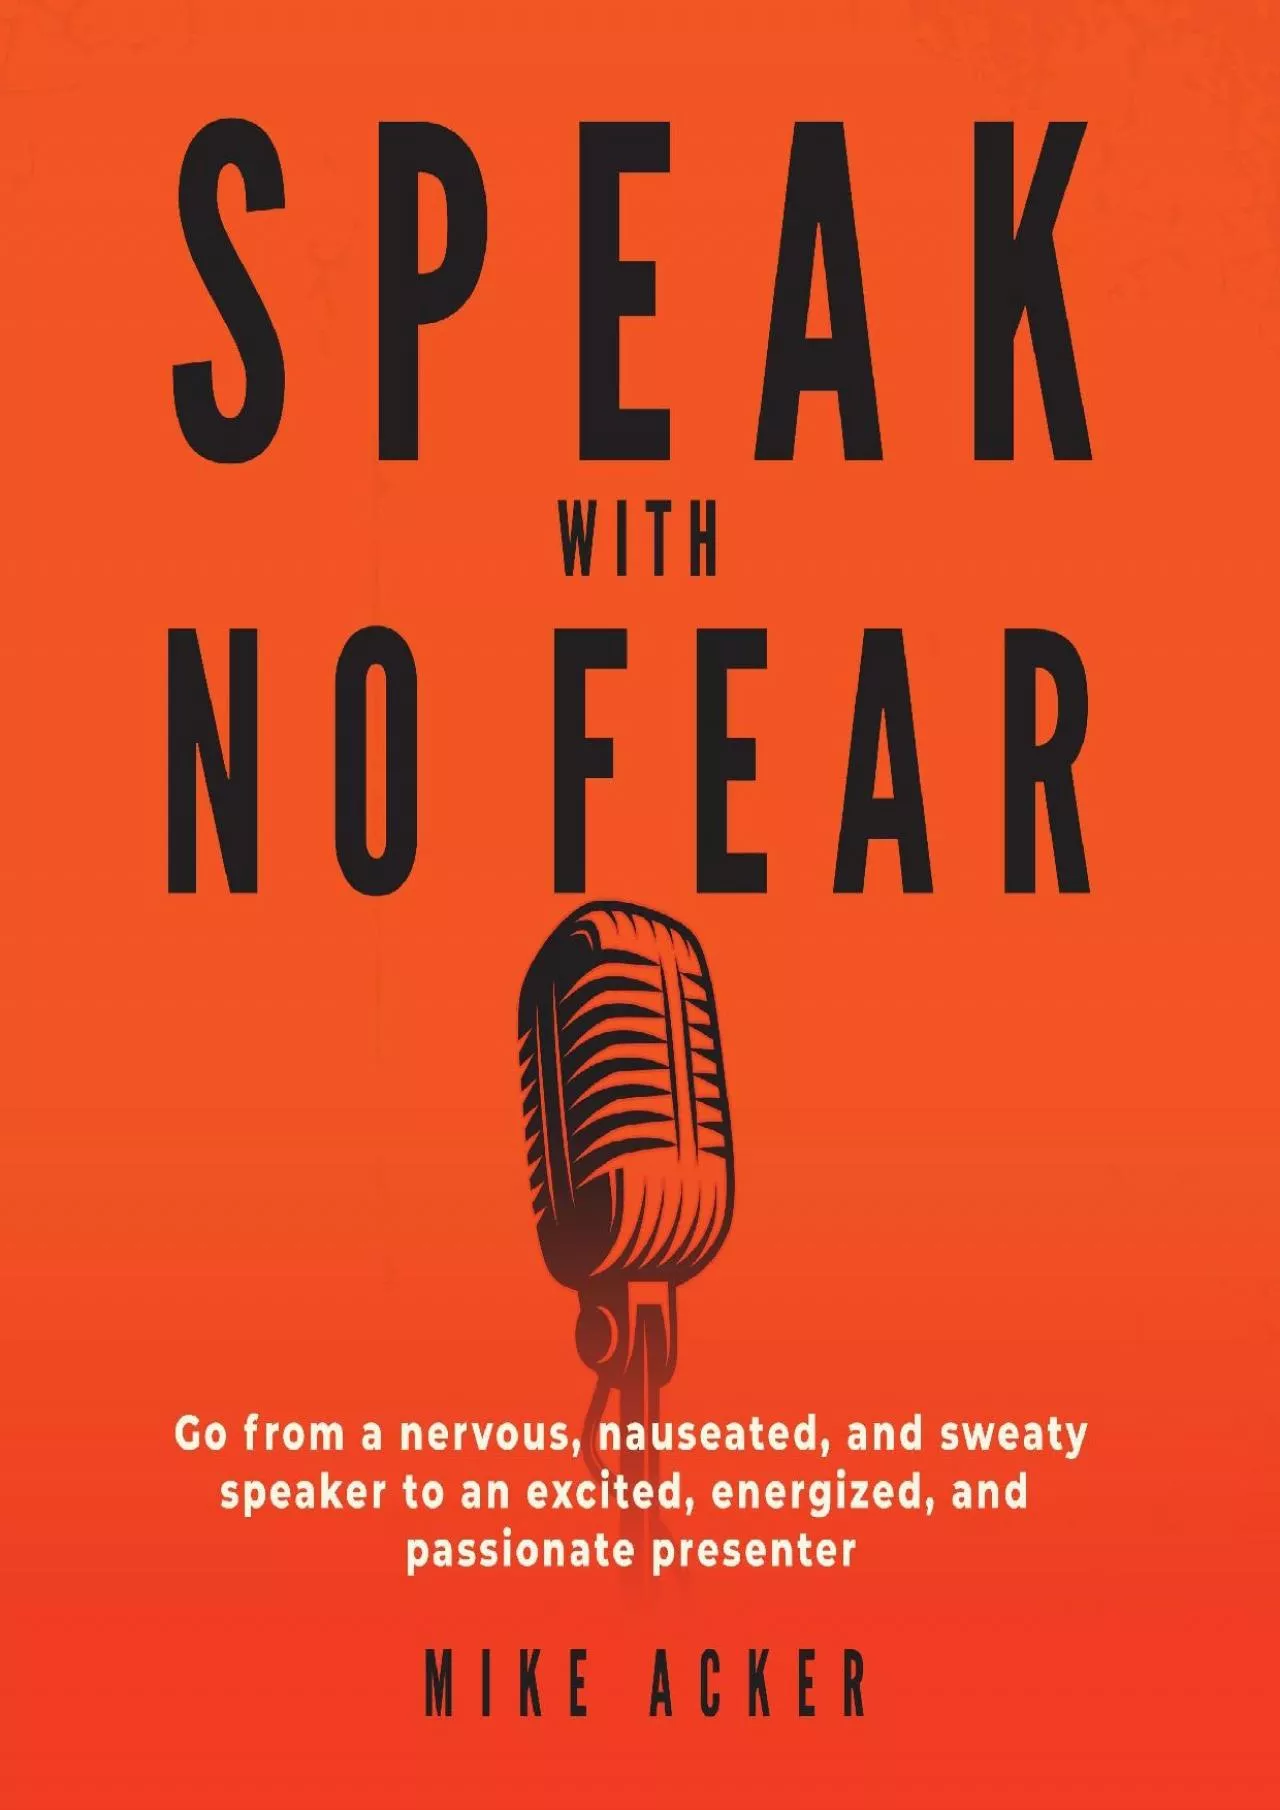 [DOWNLOAD] Speak with No Fear: Go from a Nervous, Nauseated, and Sweaty Speaker to an